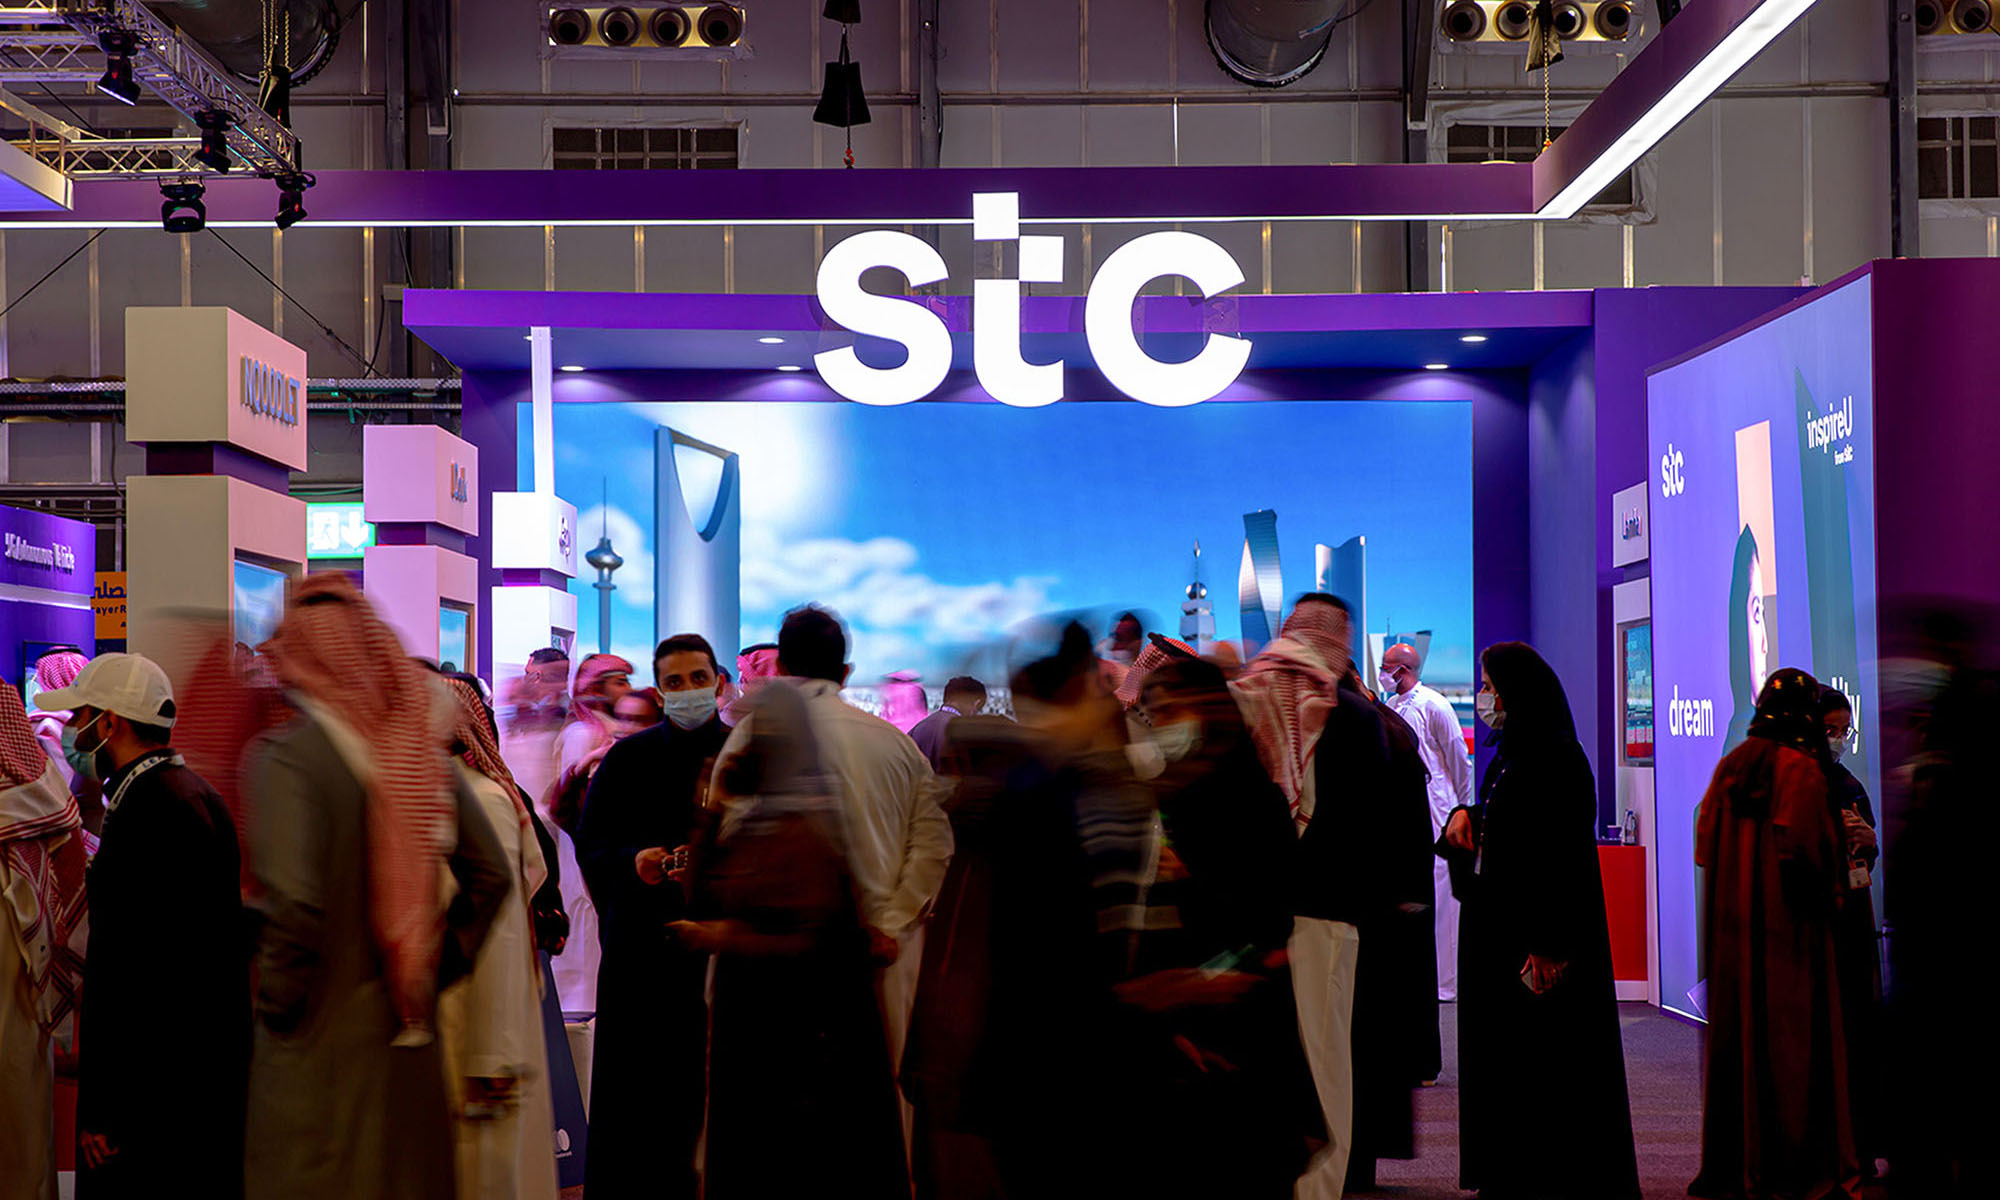 new merger creates middle east's biggest telecom company